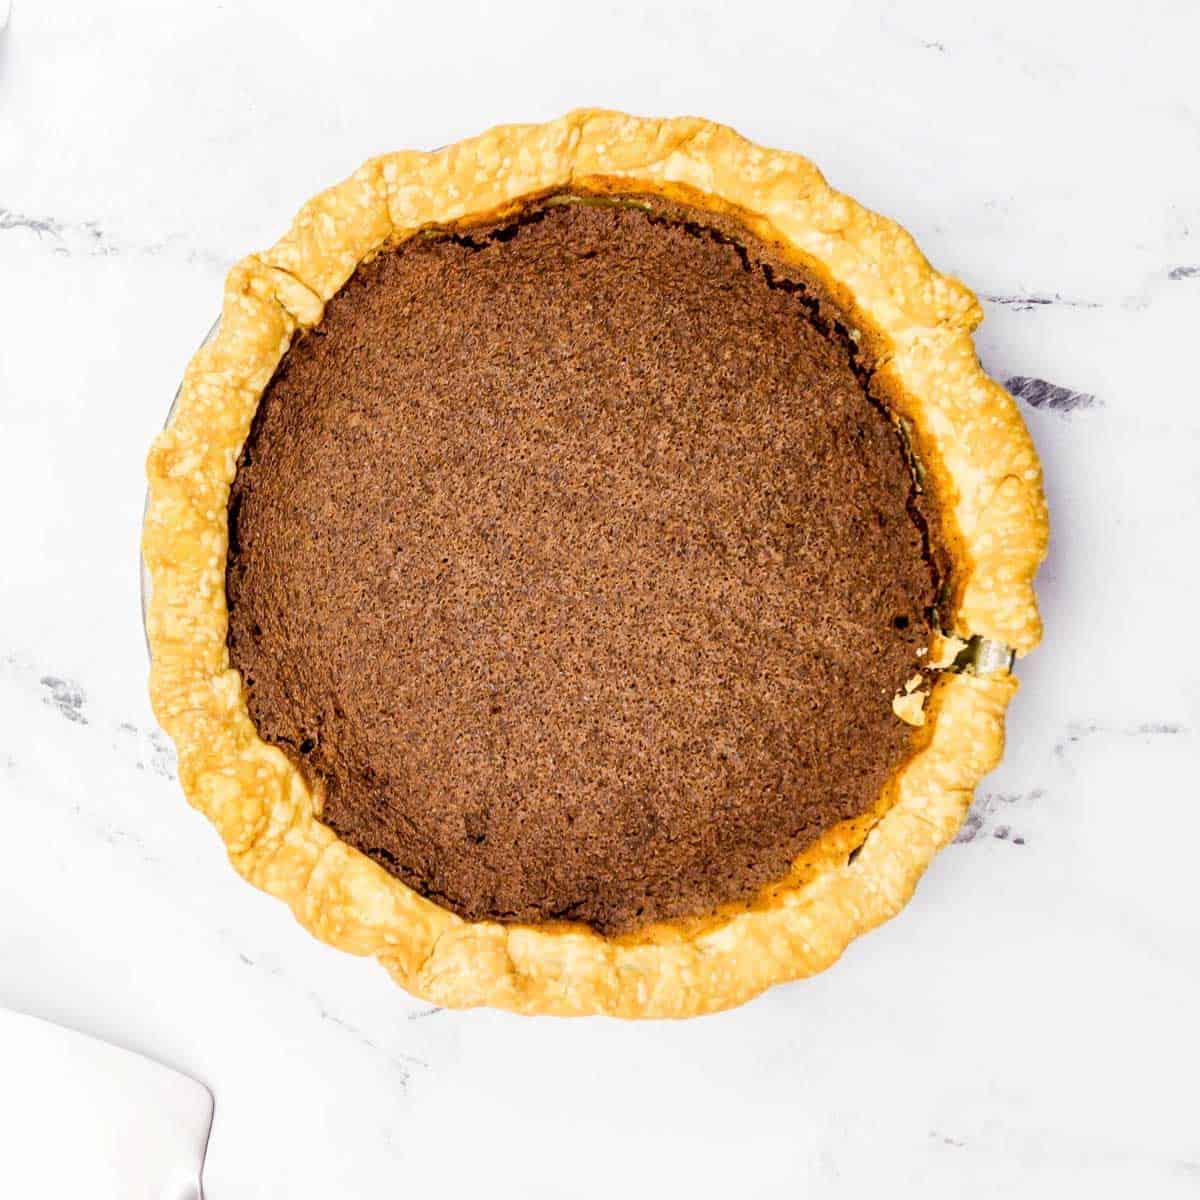 chocolate chess pie after baking on marble countertop